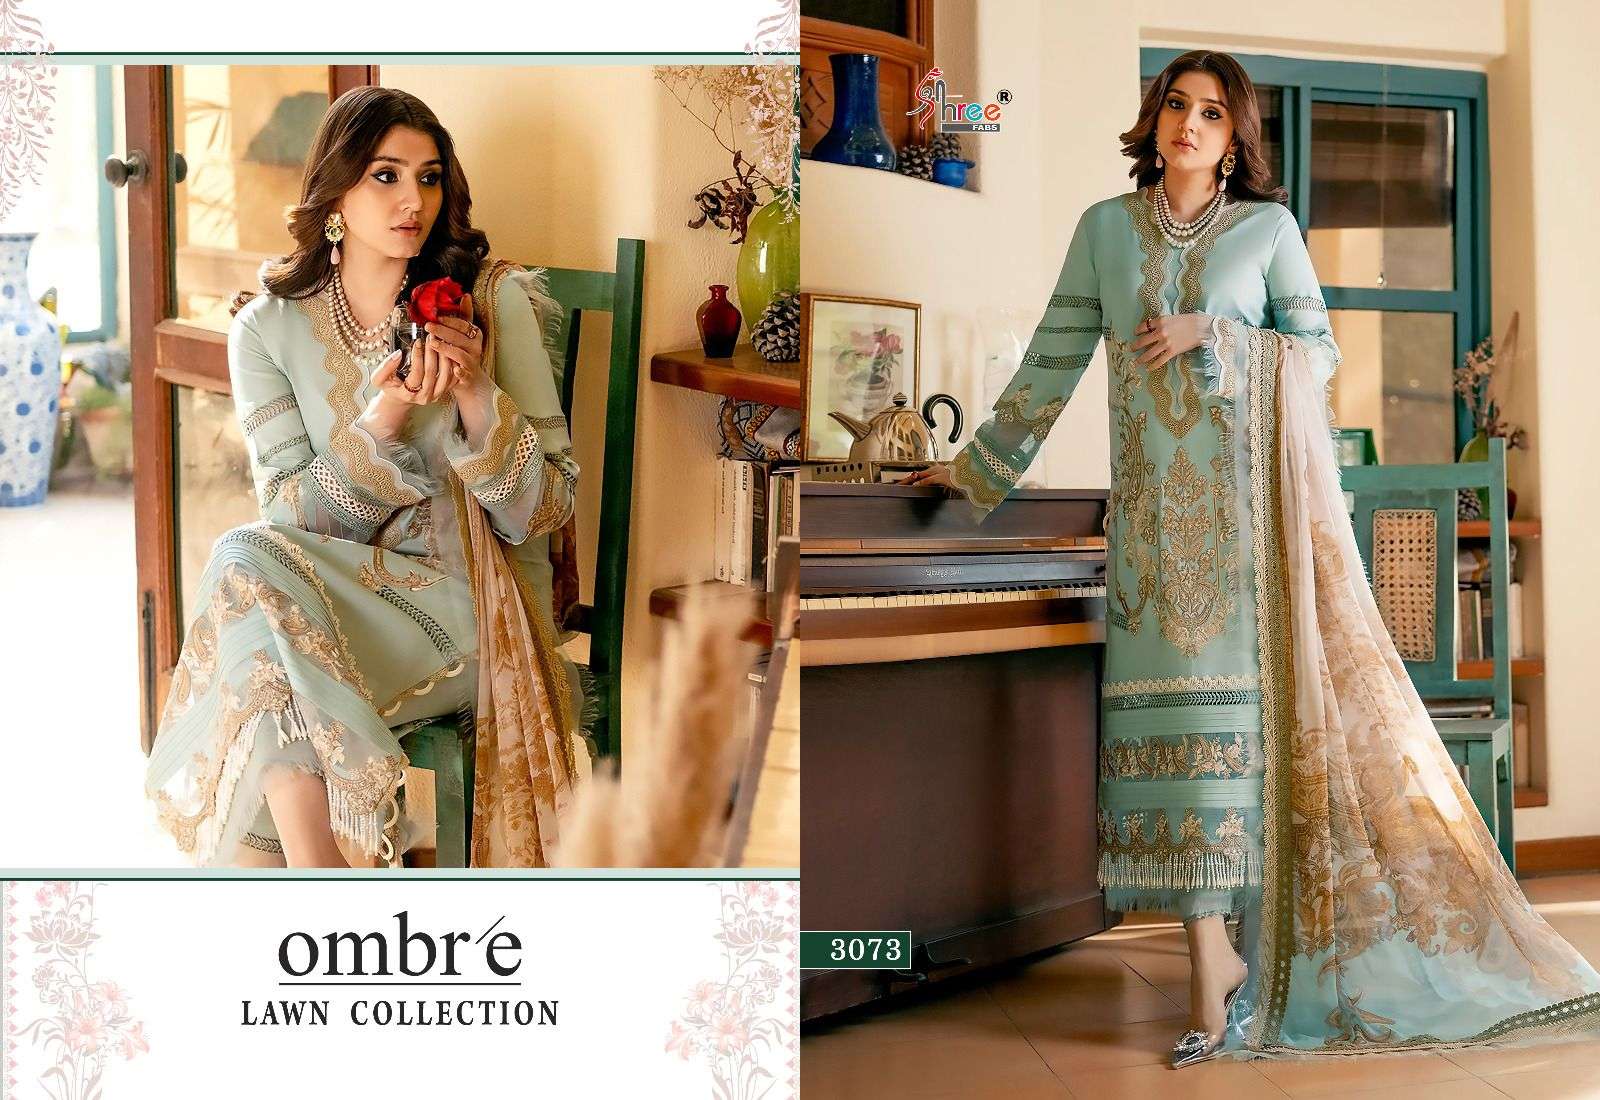 SHREE FABS OMBRE LAWN COLLECTION